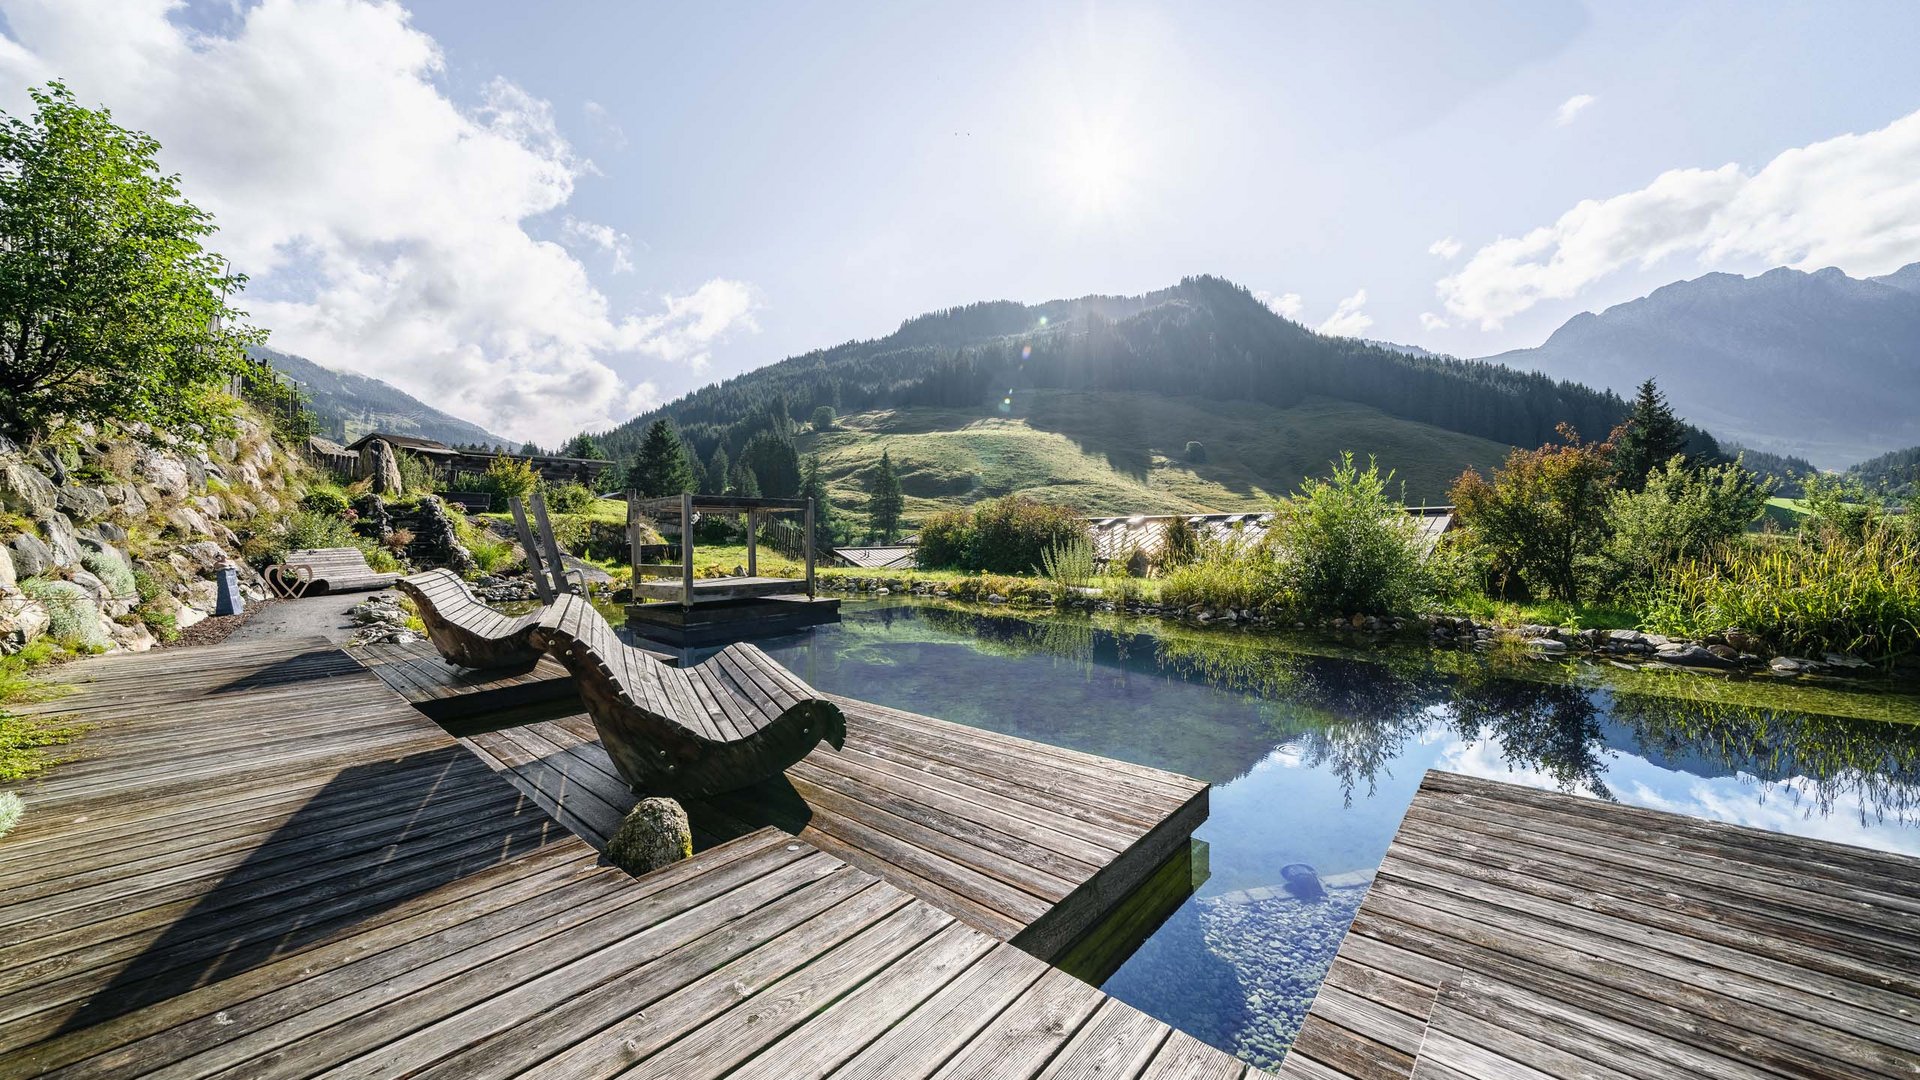 Our water world in Gerlos • Der Grubacher: Eco Hotel in Tyrol